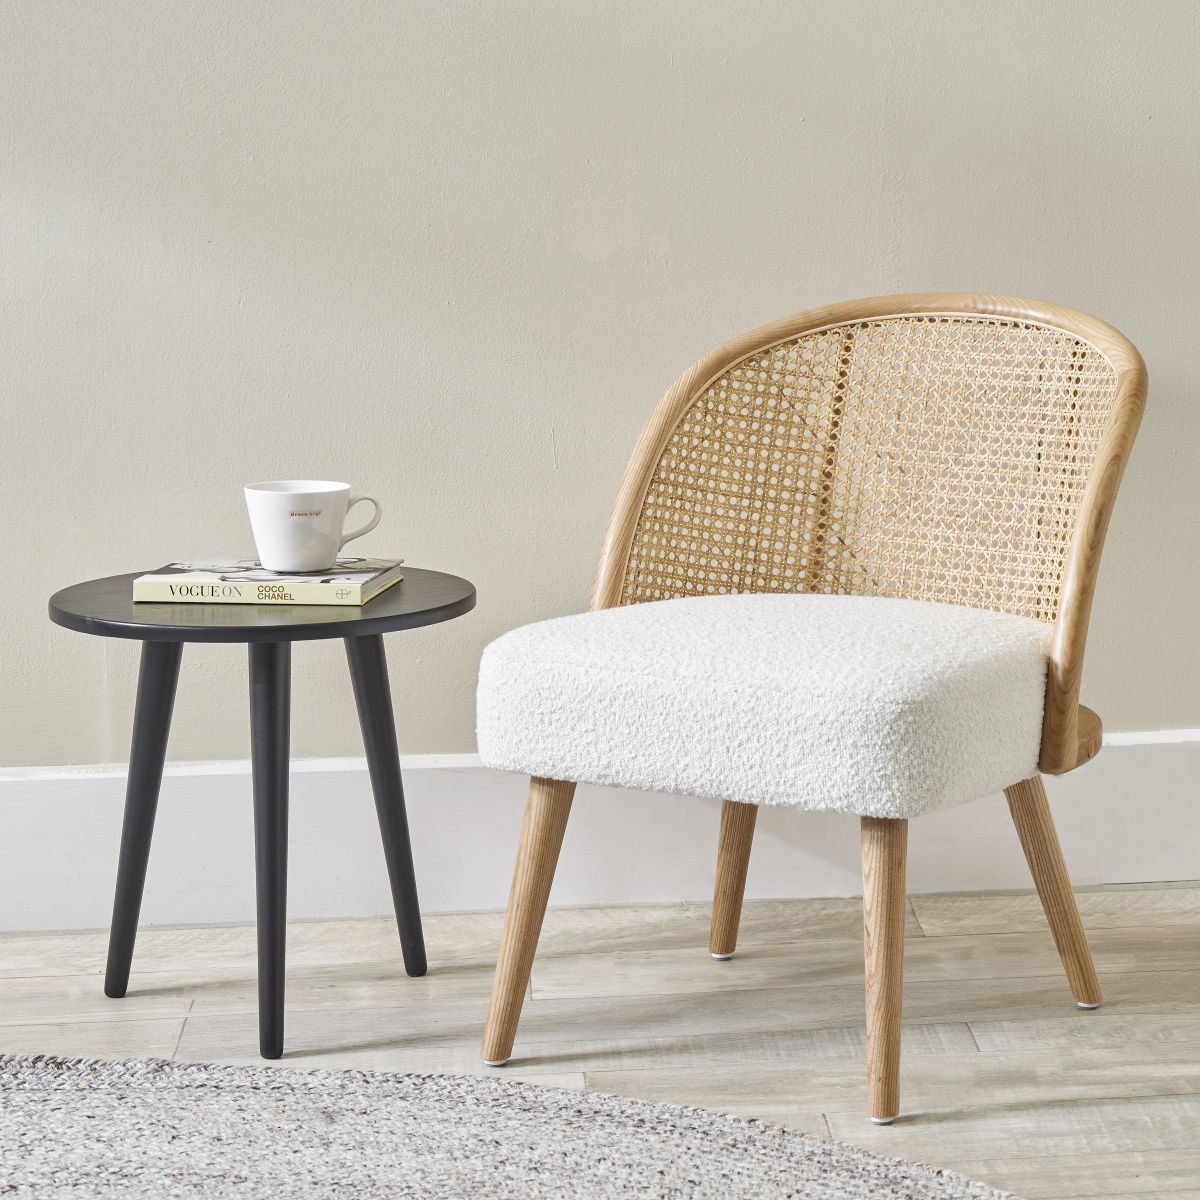 Genoa Bouclé and Natural French Cane Chair